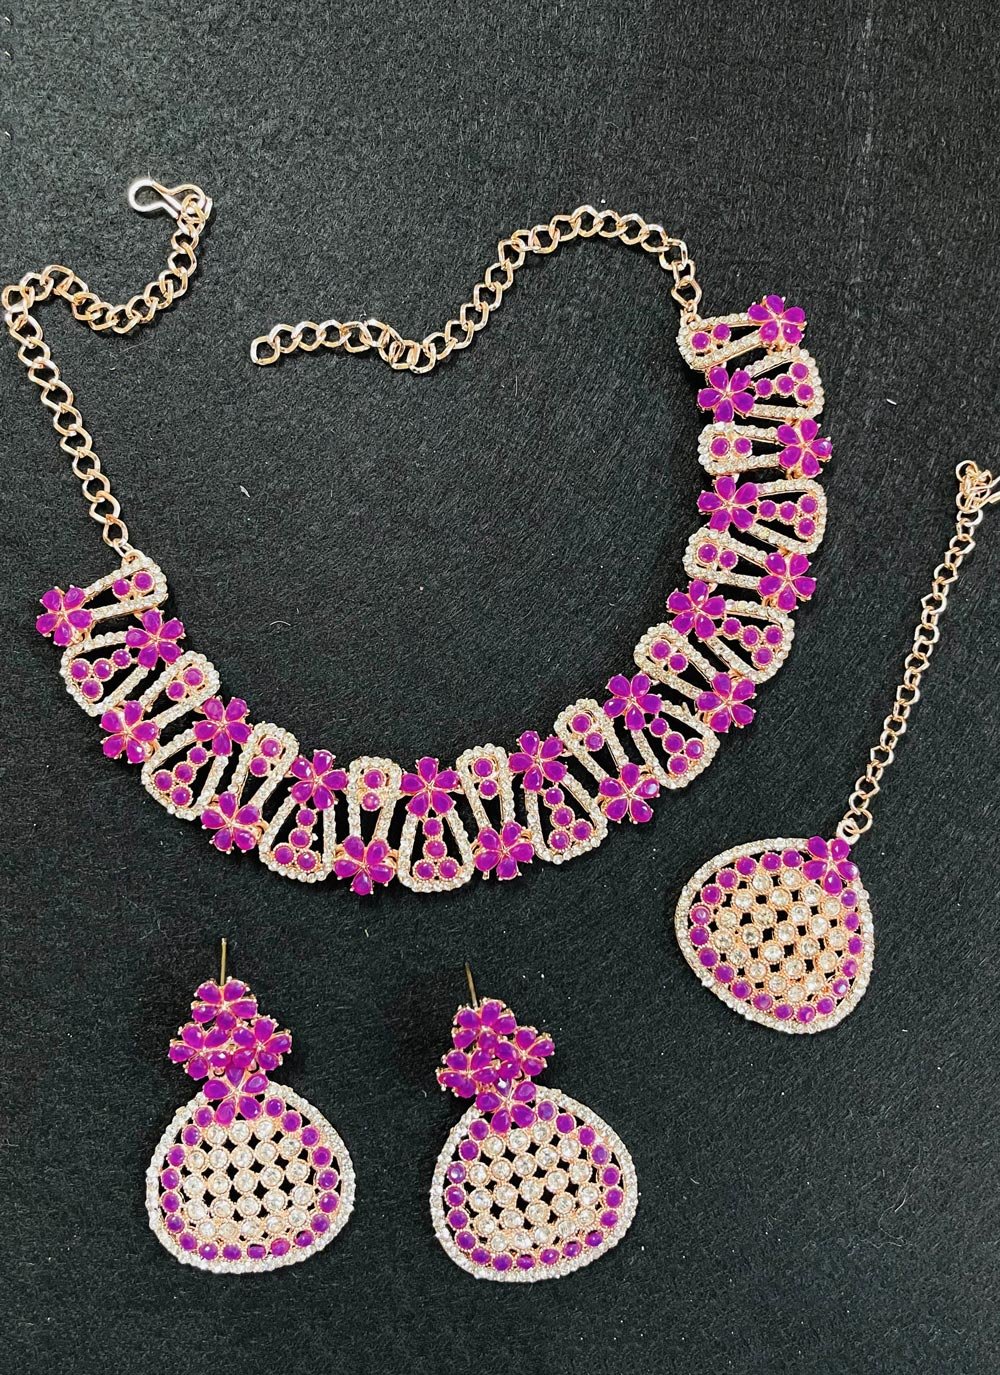 Glorious Alloy Stone Work Magenta and White Necklace Set